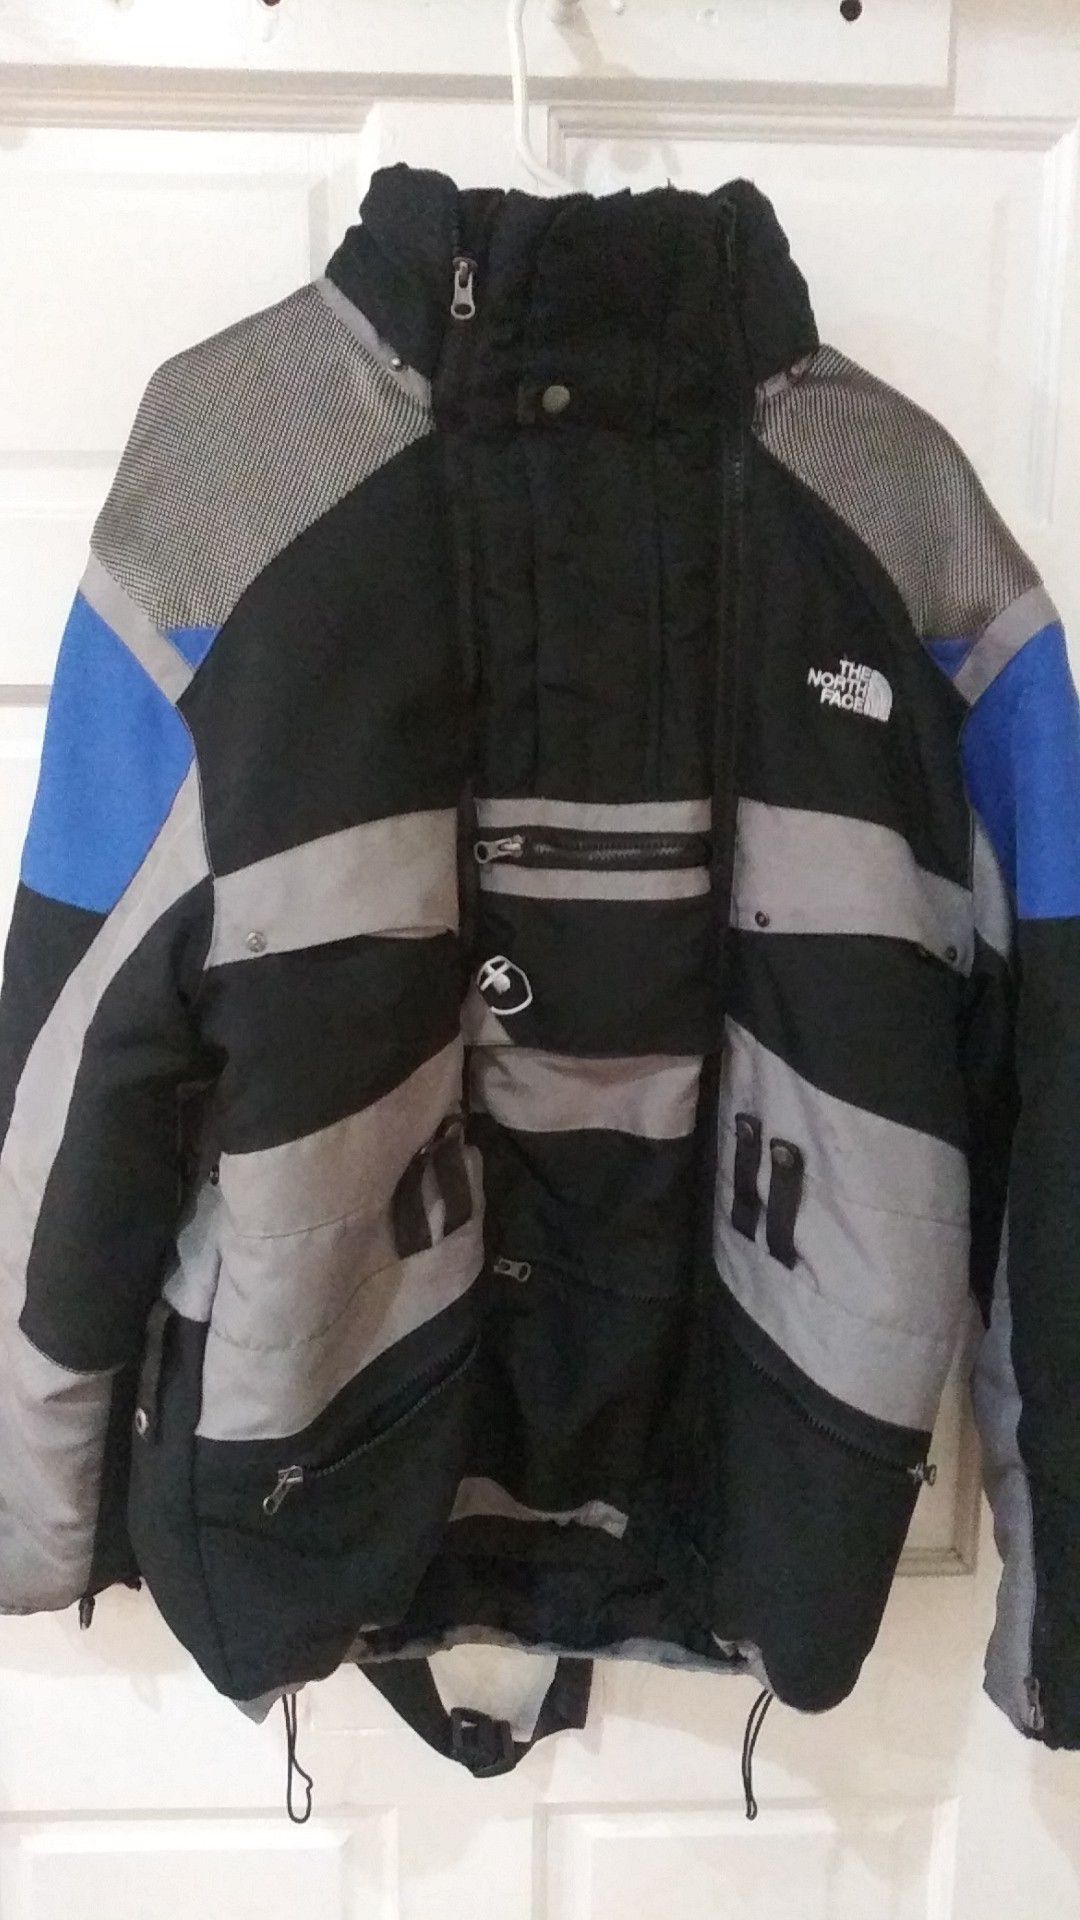 North face winter coat in perfect condition